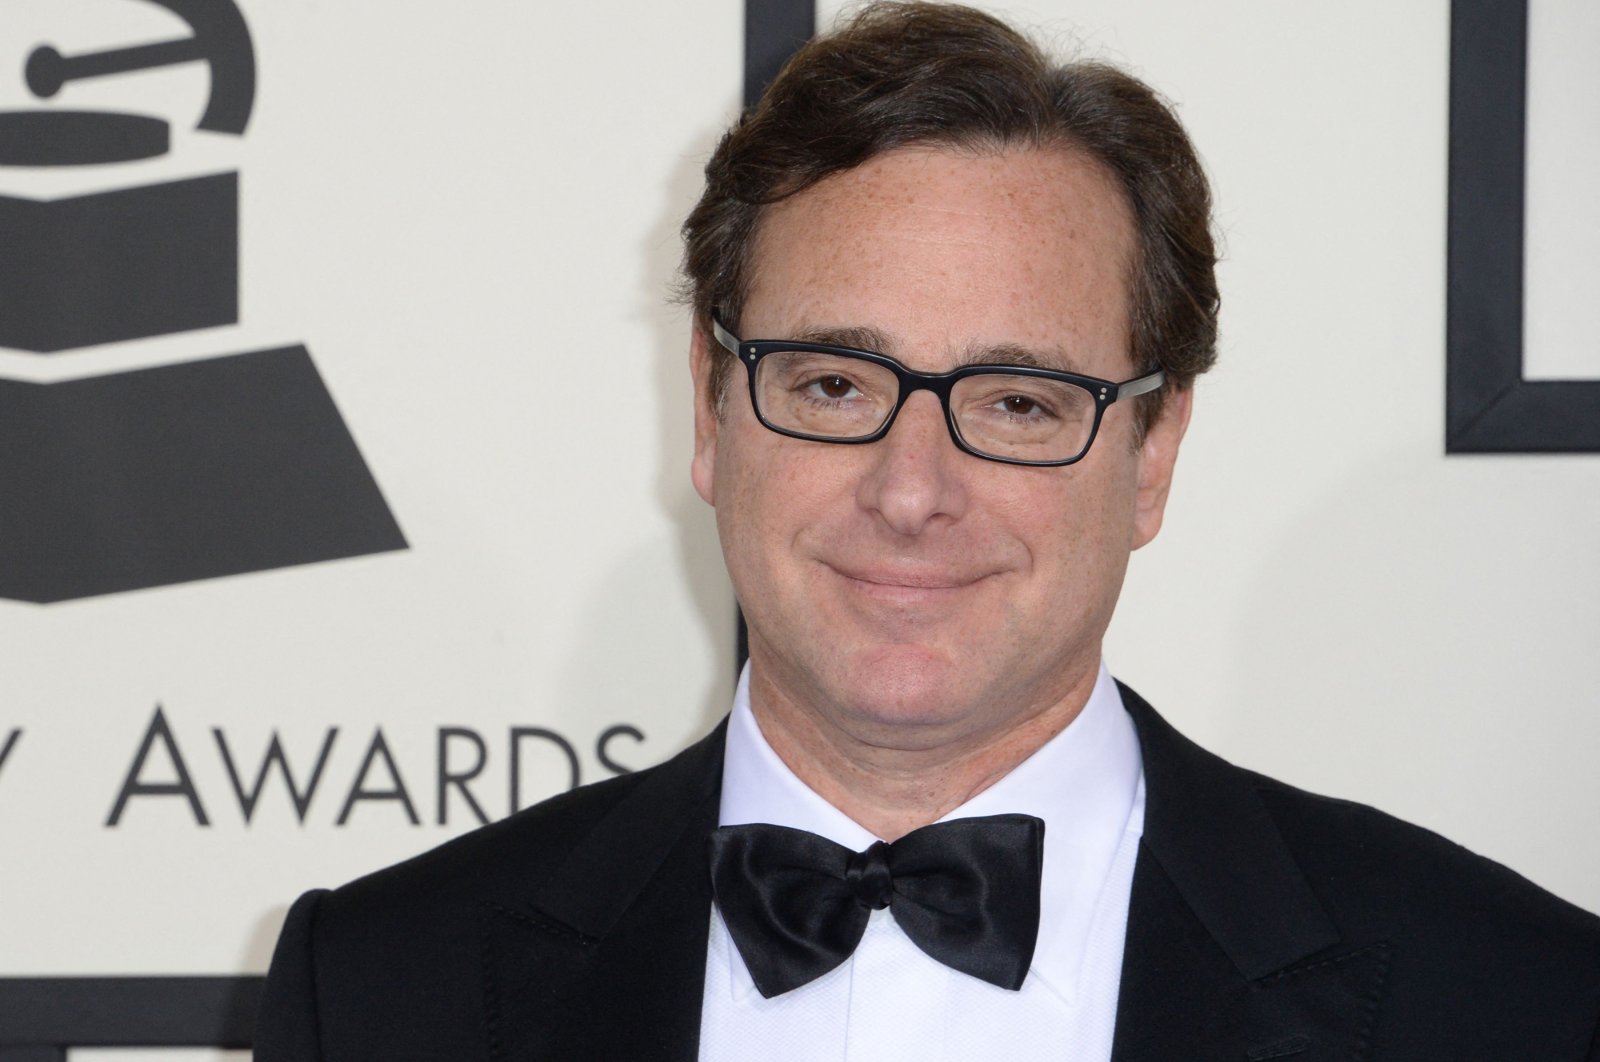 Bob Saget arrives on the red carpet for the 56th Grammy Awards at the Staples Center in Los Angeles, California, U.S., Jan. 26, 2014. (AFP Photo)